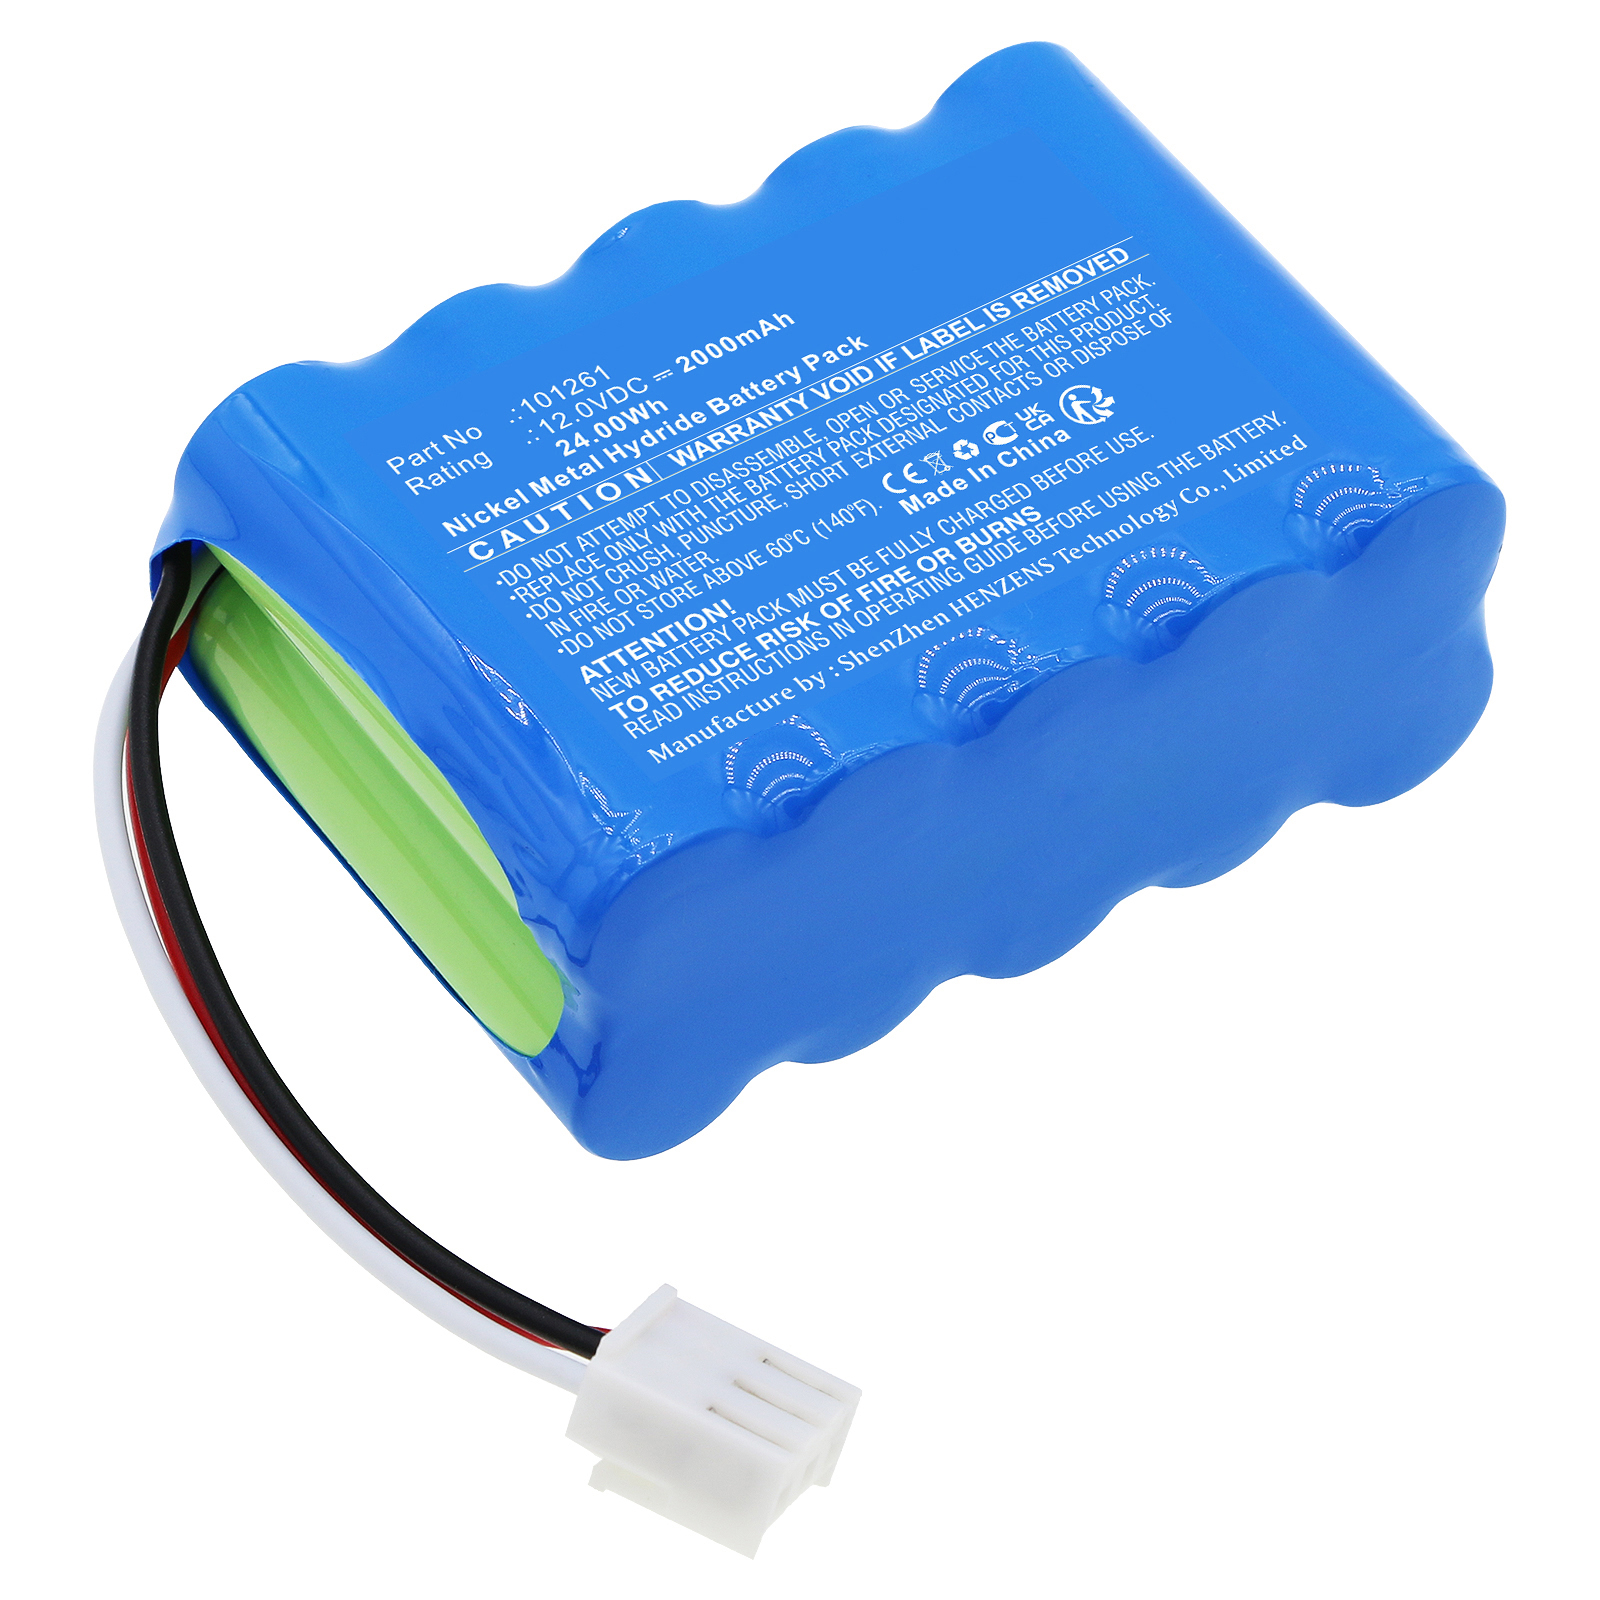 Synergy Digital Marine Safety & Flotation Devices Battery, Compatible with Navgard Bnwas 101261 Marine Safety & Flotation Devices Battery (Ni-MH, 12V, 2000mAh)